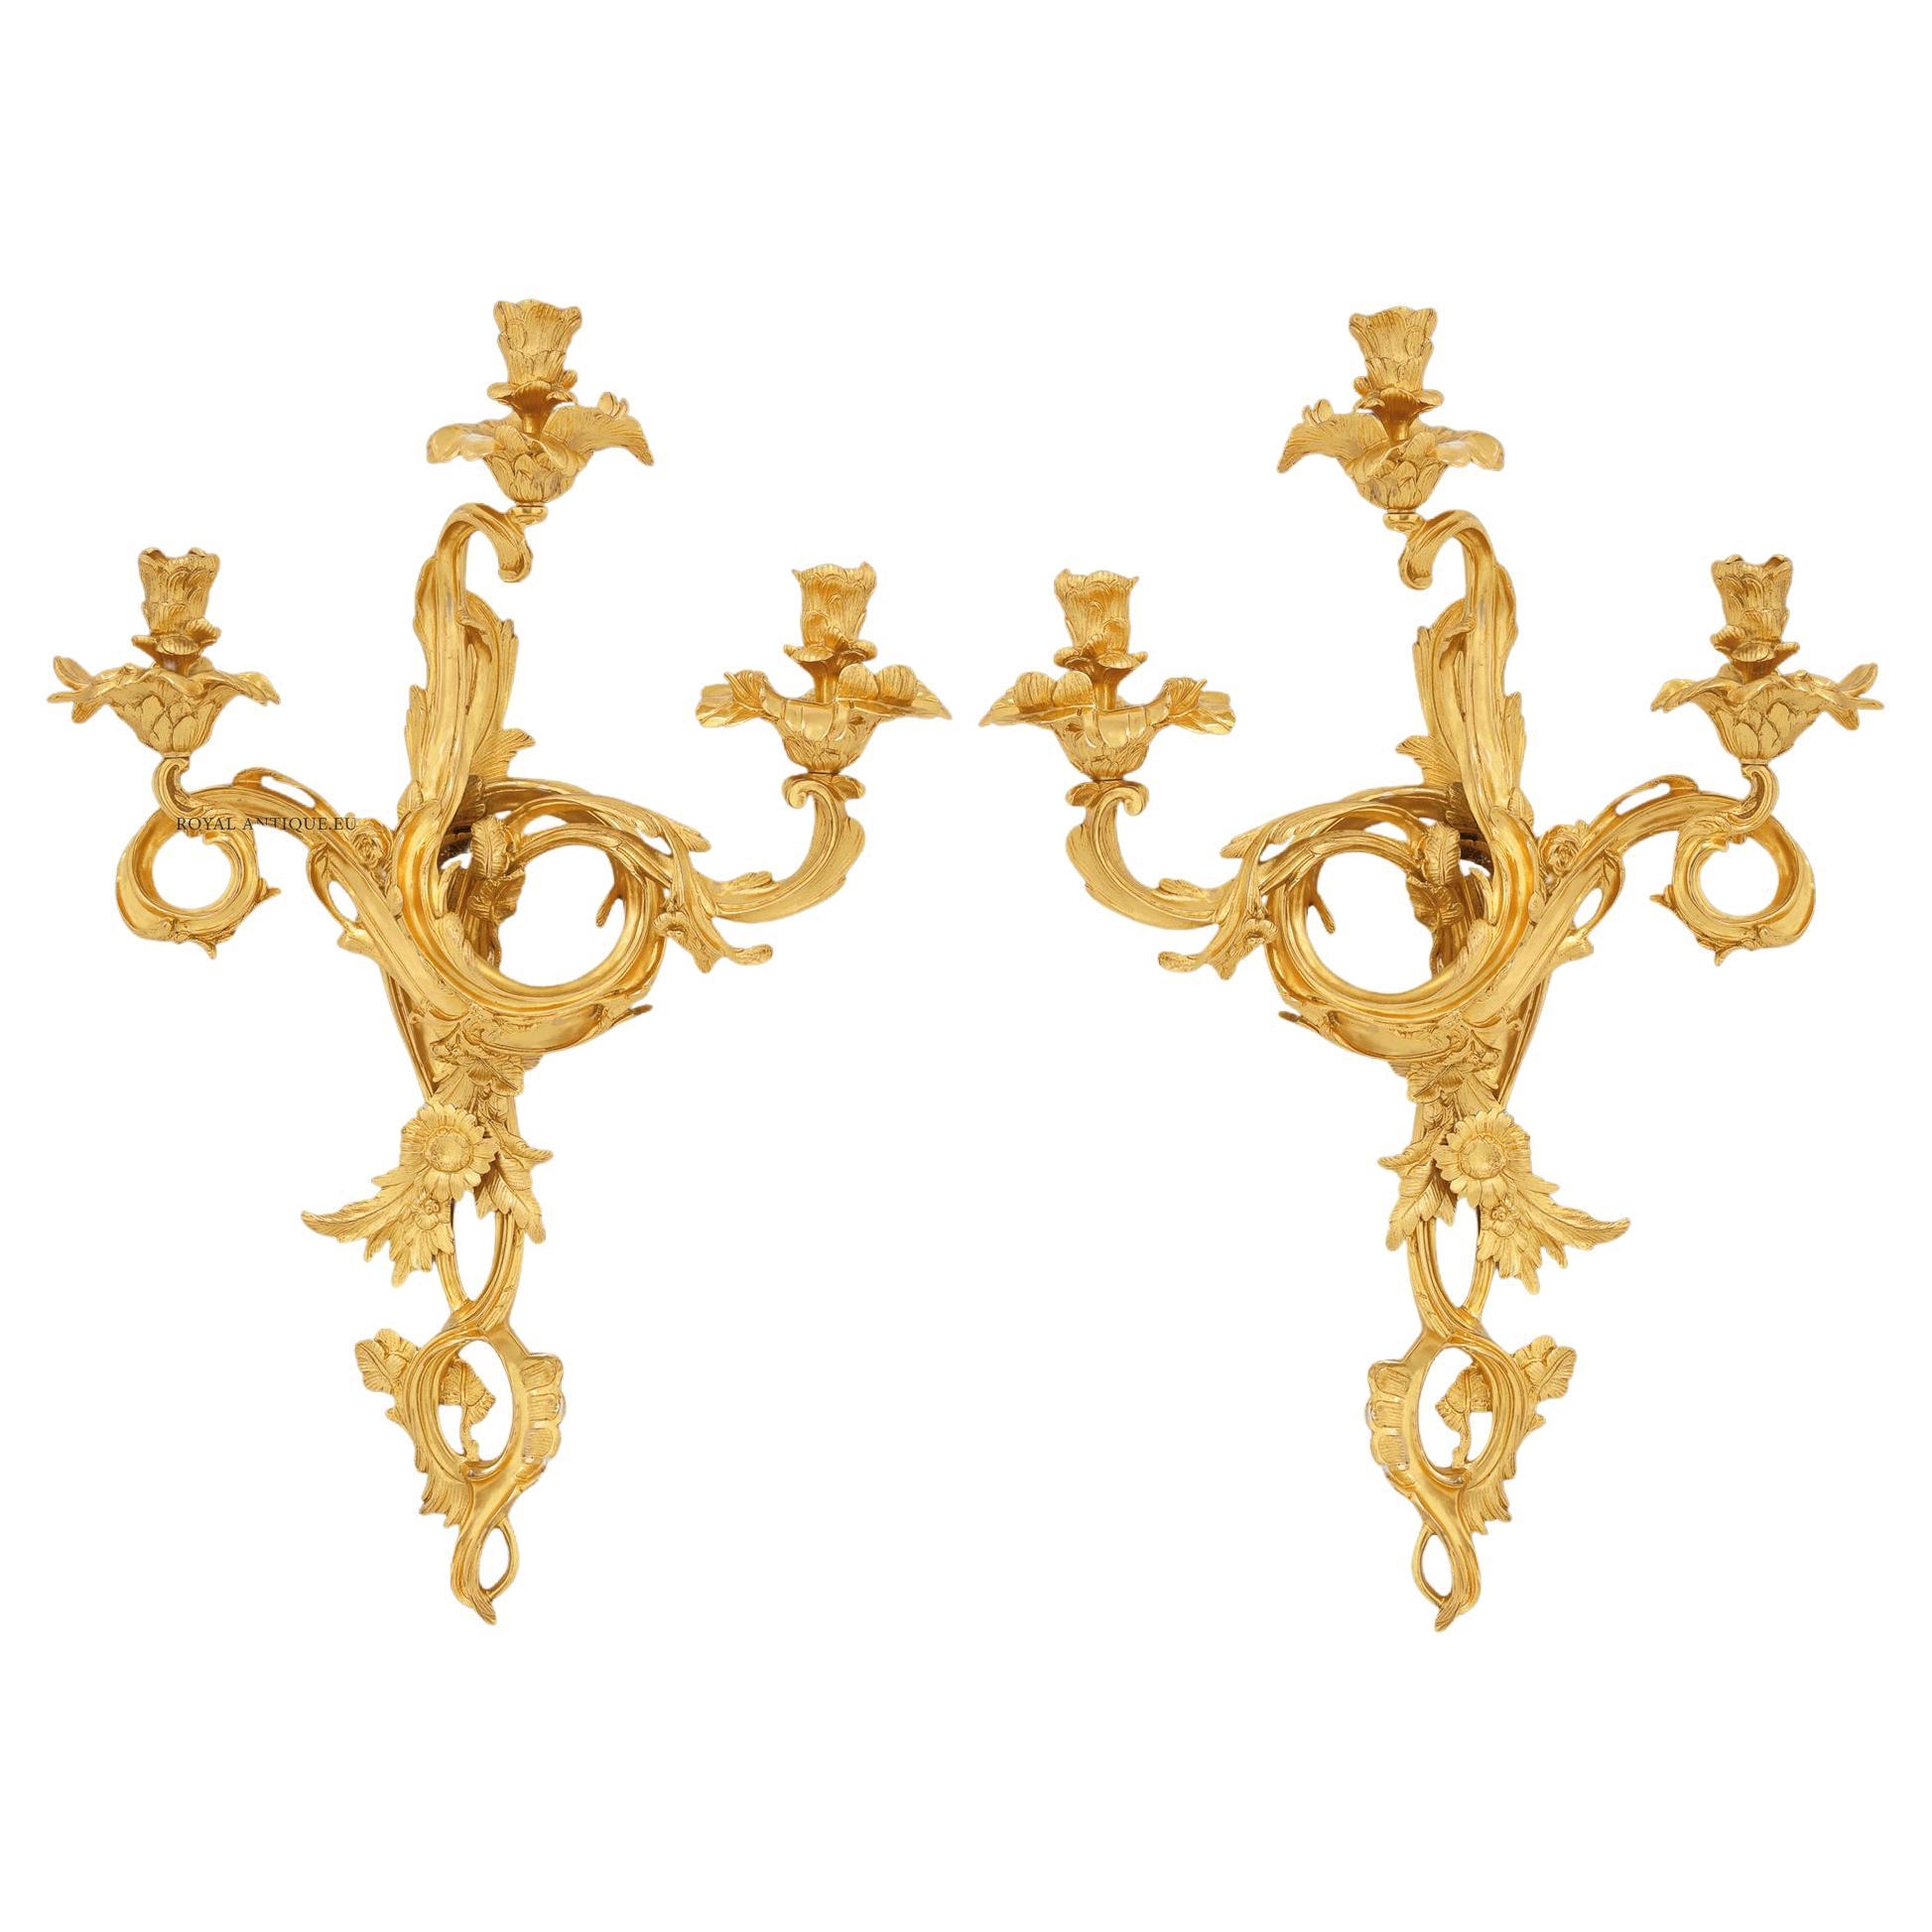 Pair of Wall Lights 19th Century Rococo